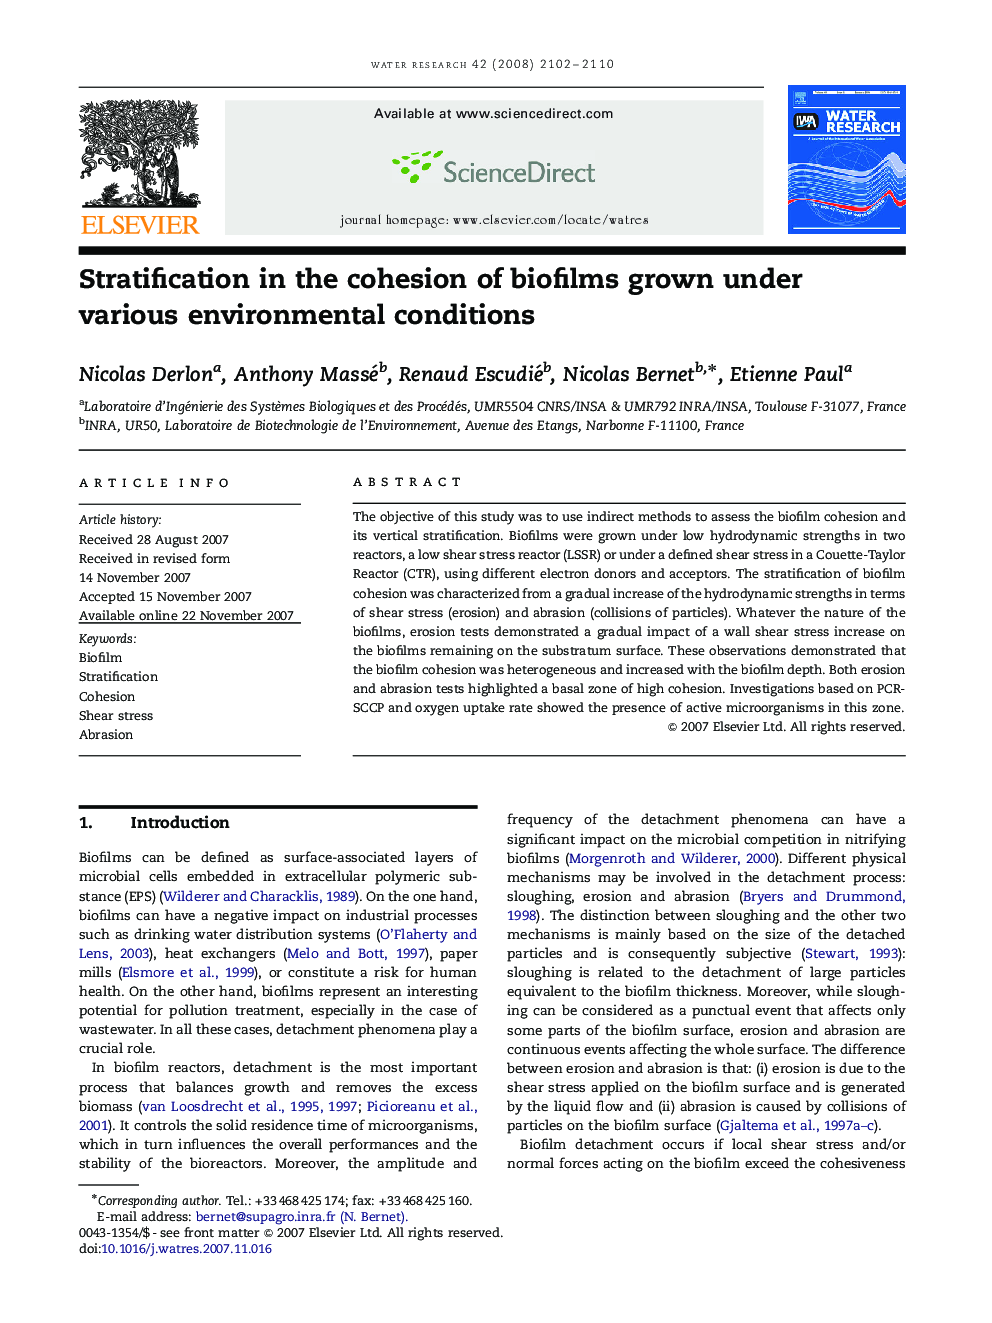 Stratification in the cohesion of biofilms grown under various environmental conditions